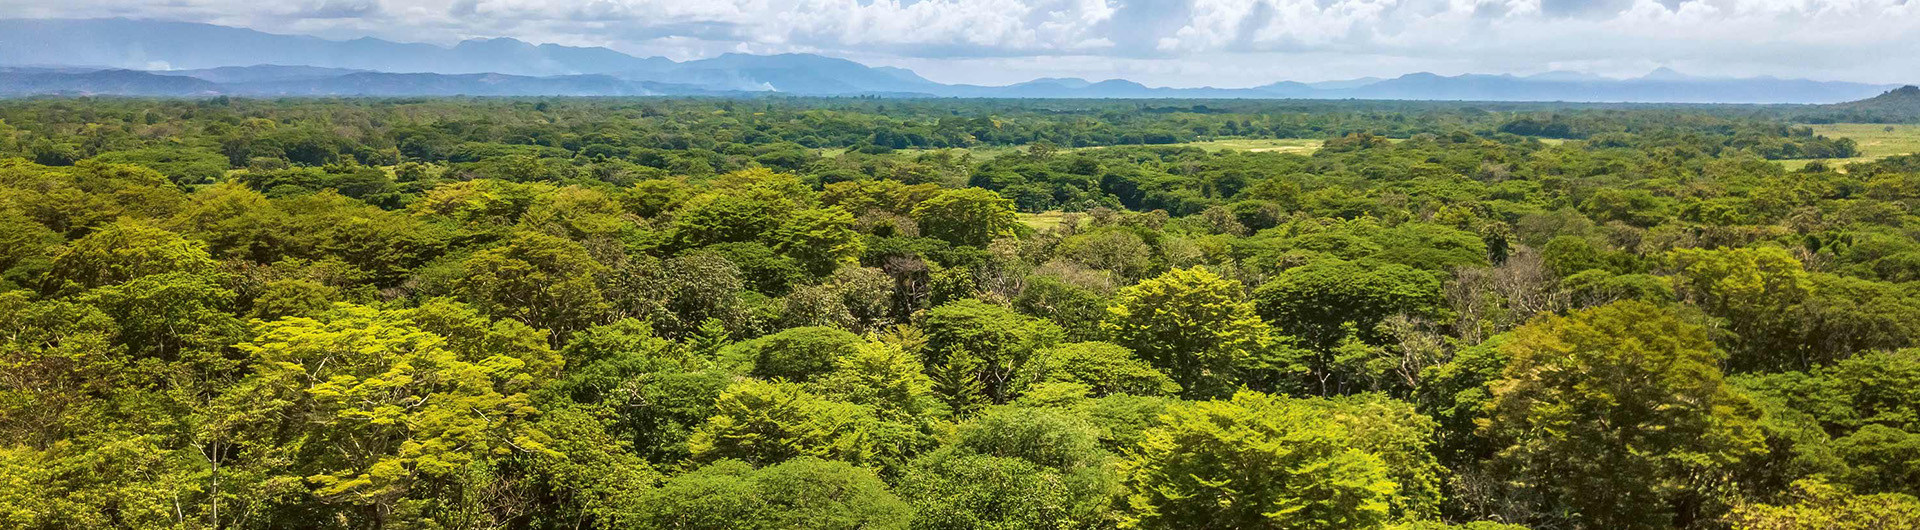 Aerial view of tropical forest with mountain view (Photo)